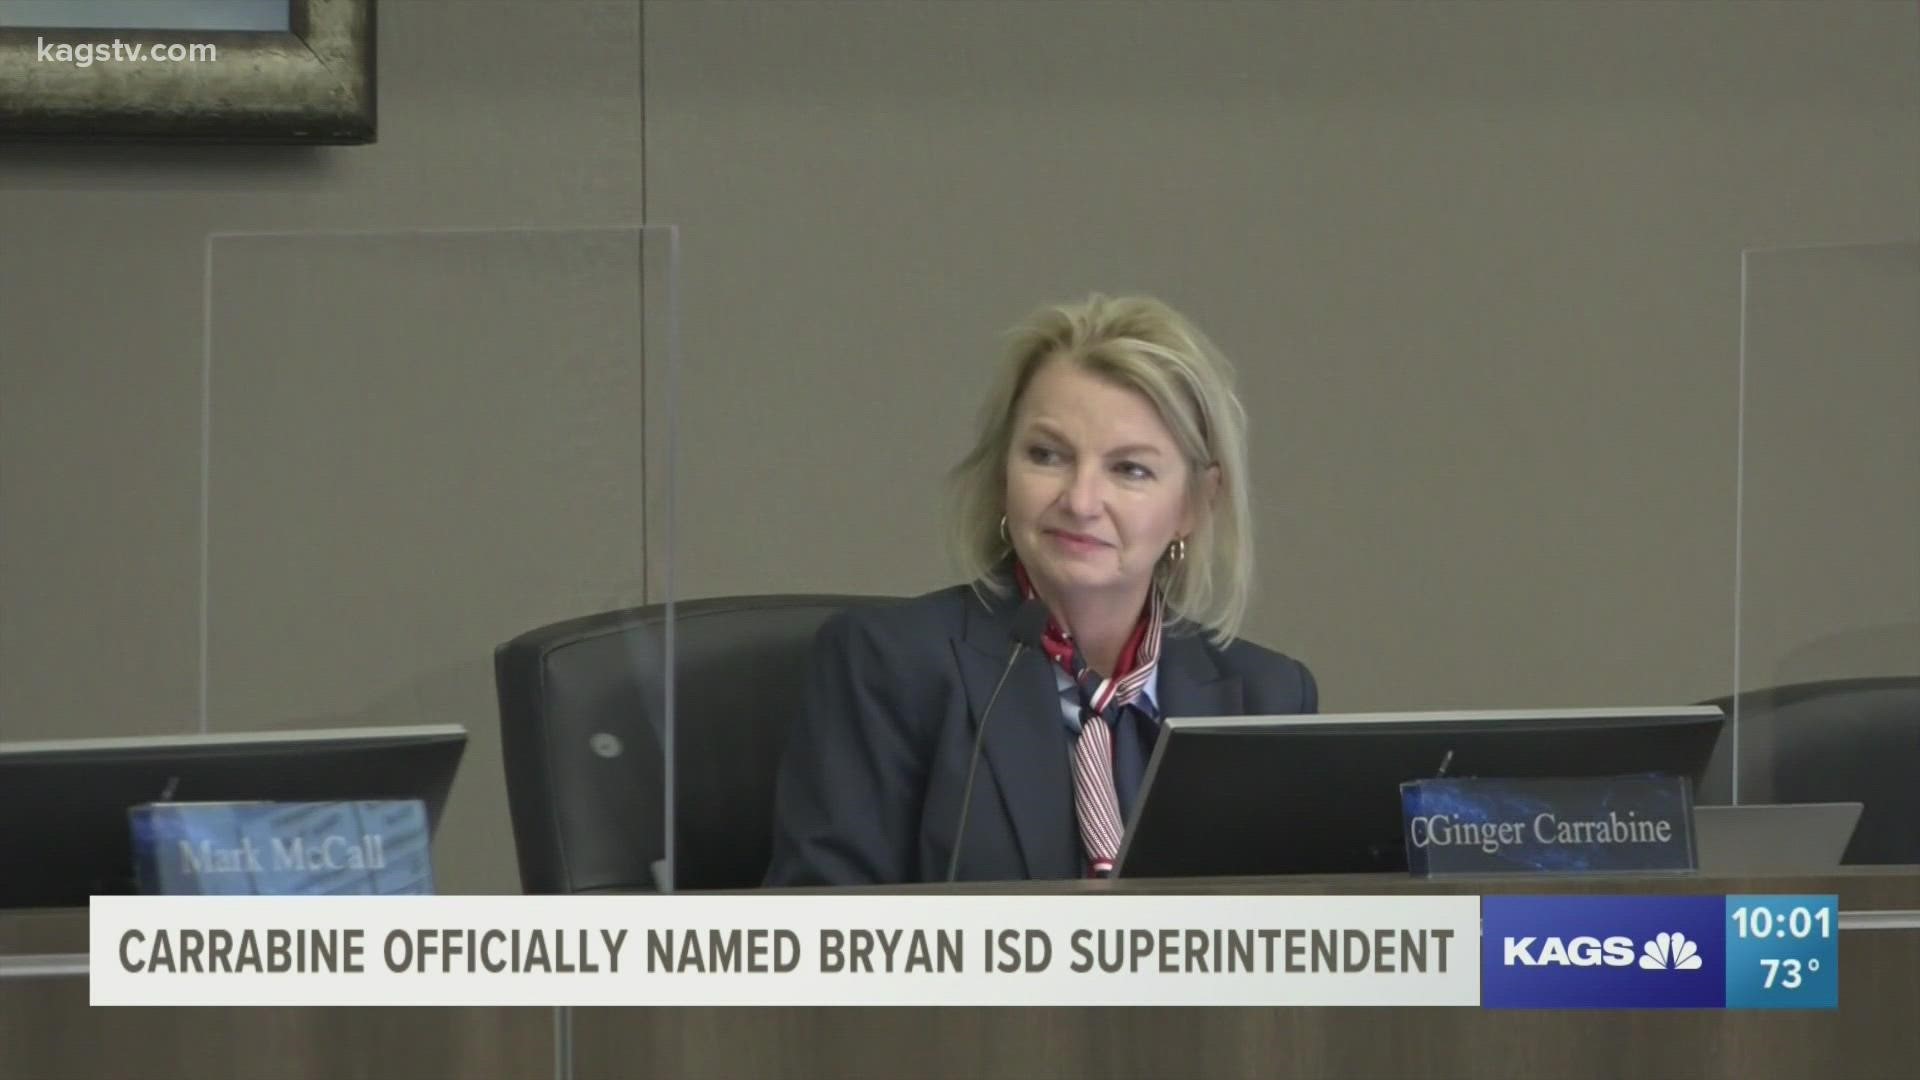 She has been the interim superintendent for several months and the decision was made official Monday.